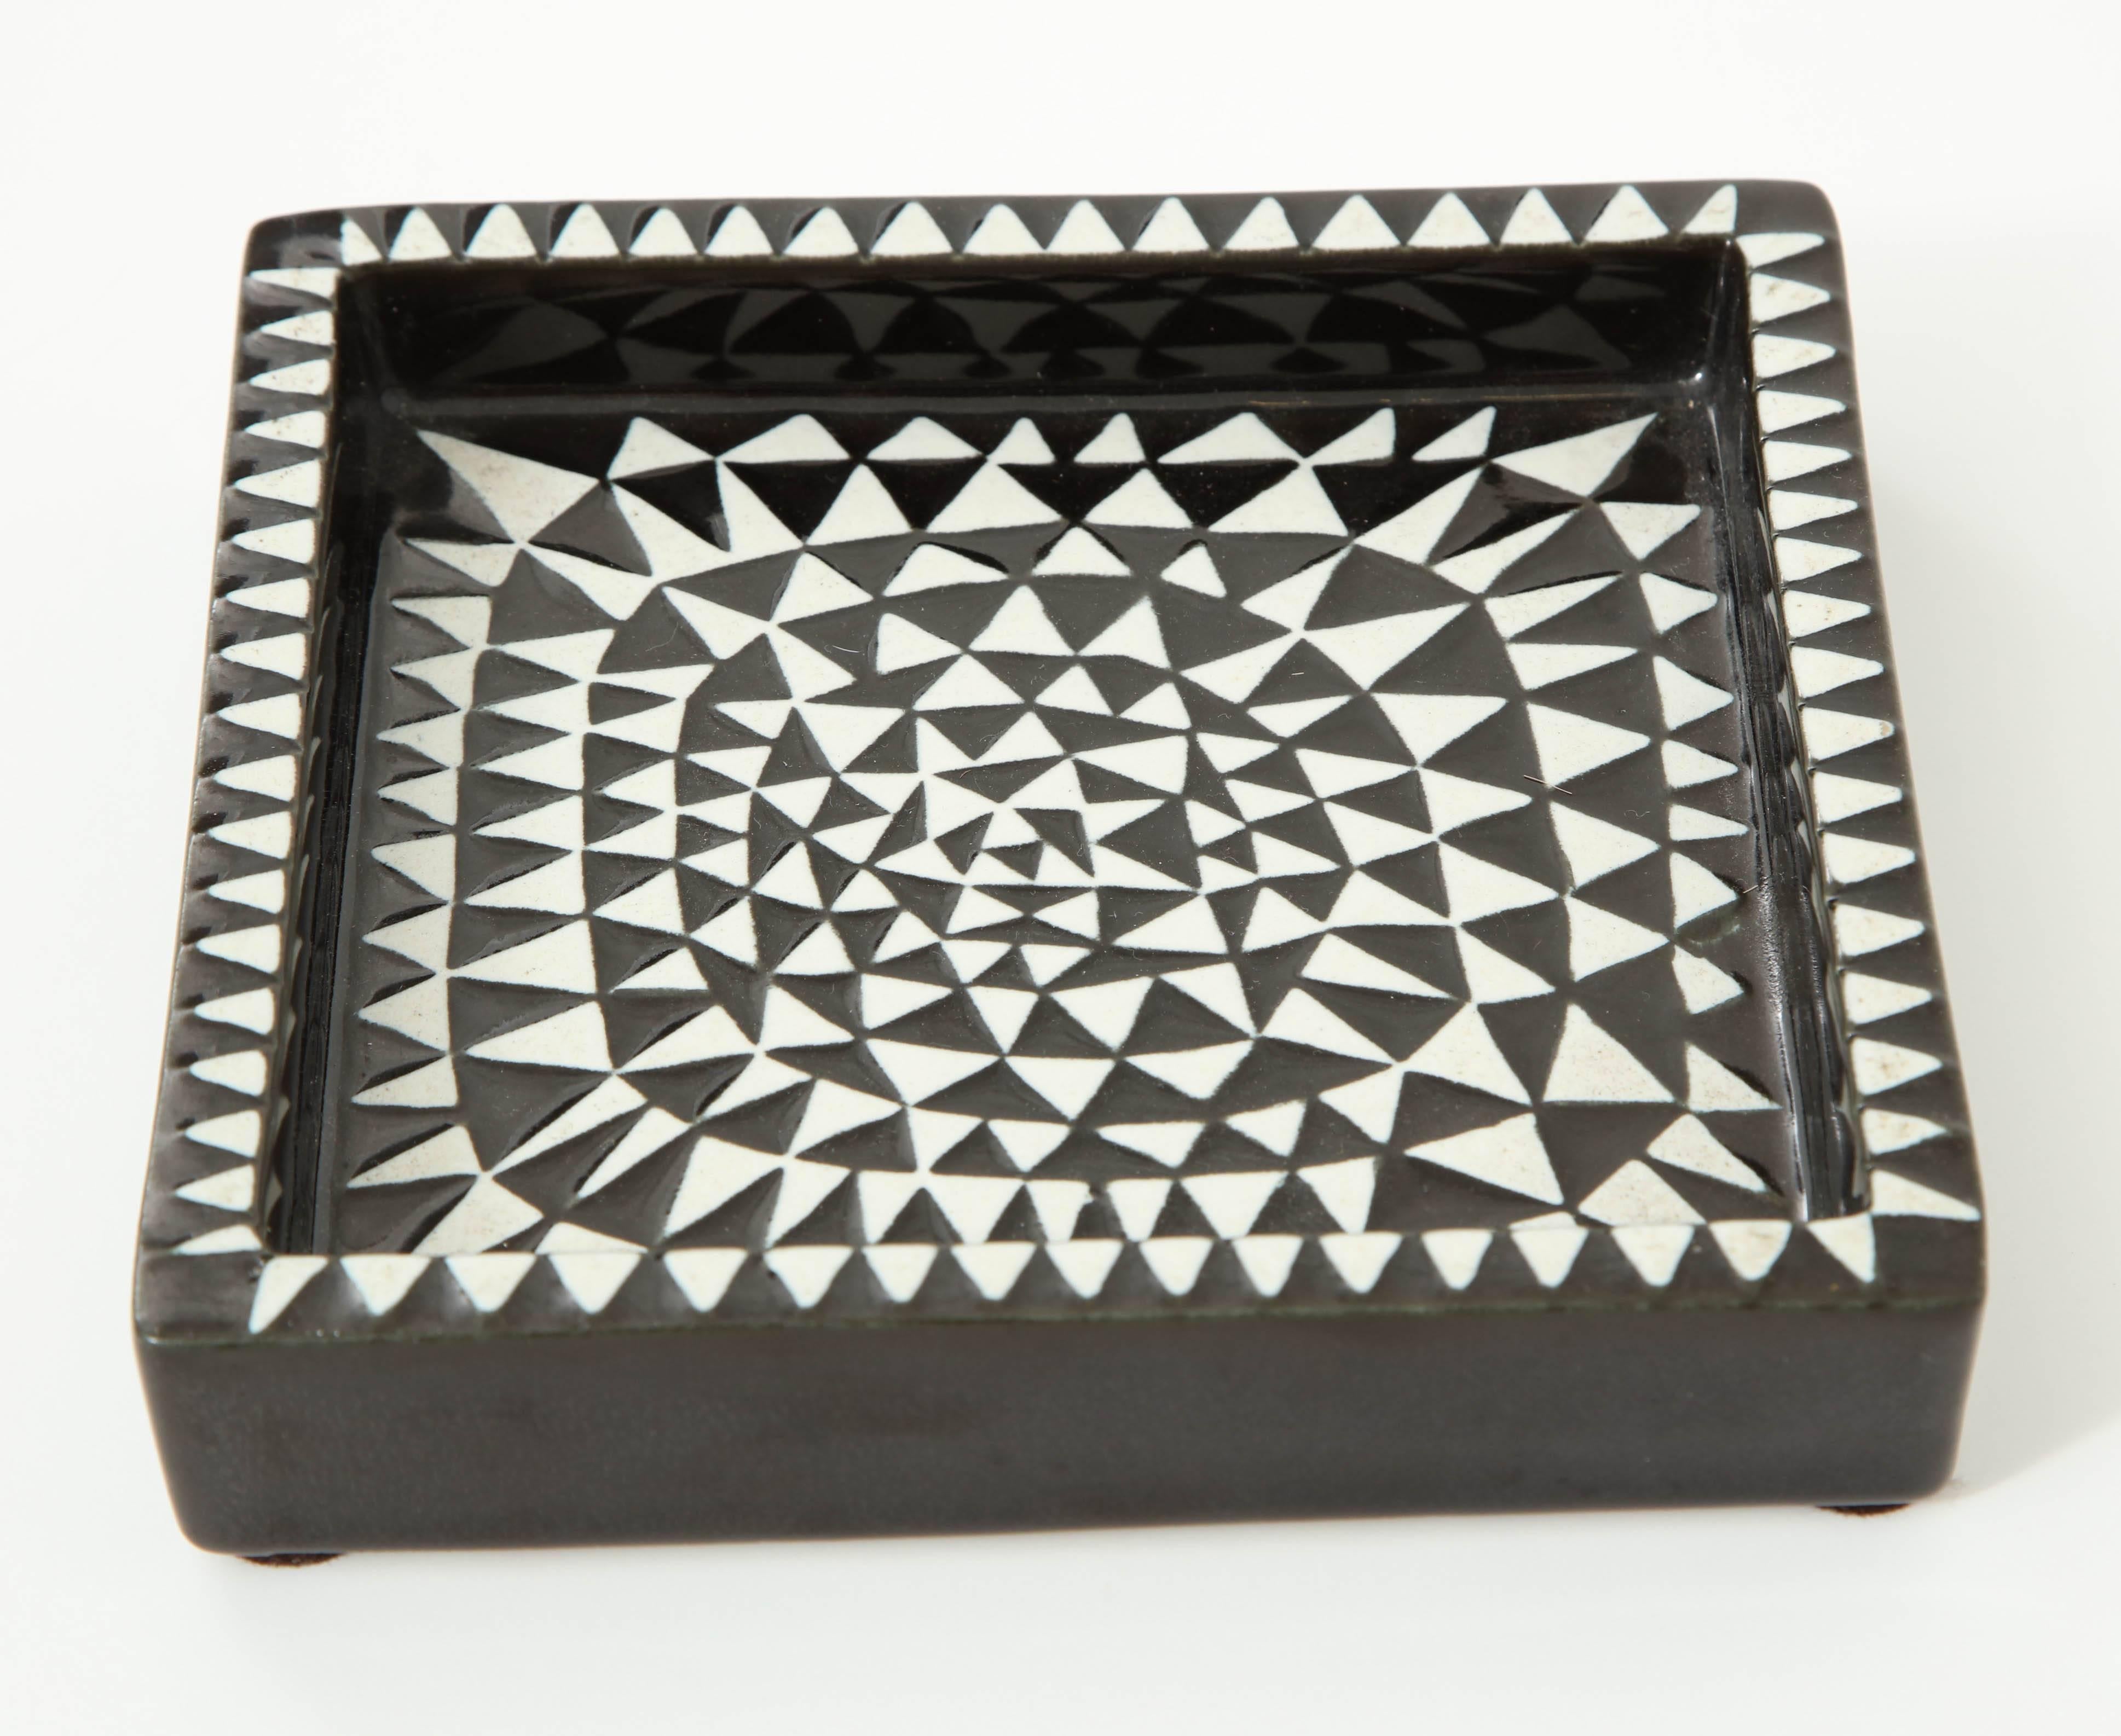 Ashtray by Stig Lindberg, Sweden, circa 1959. The design comes from a group called 